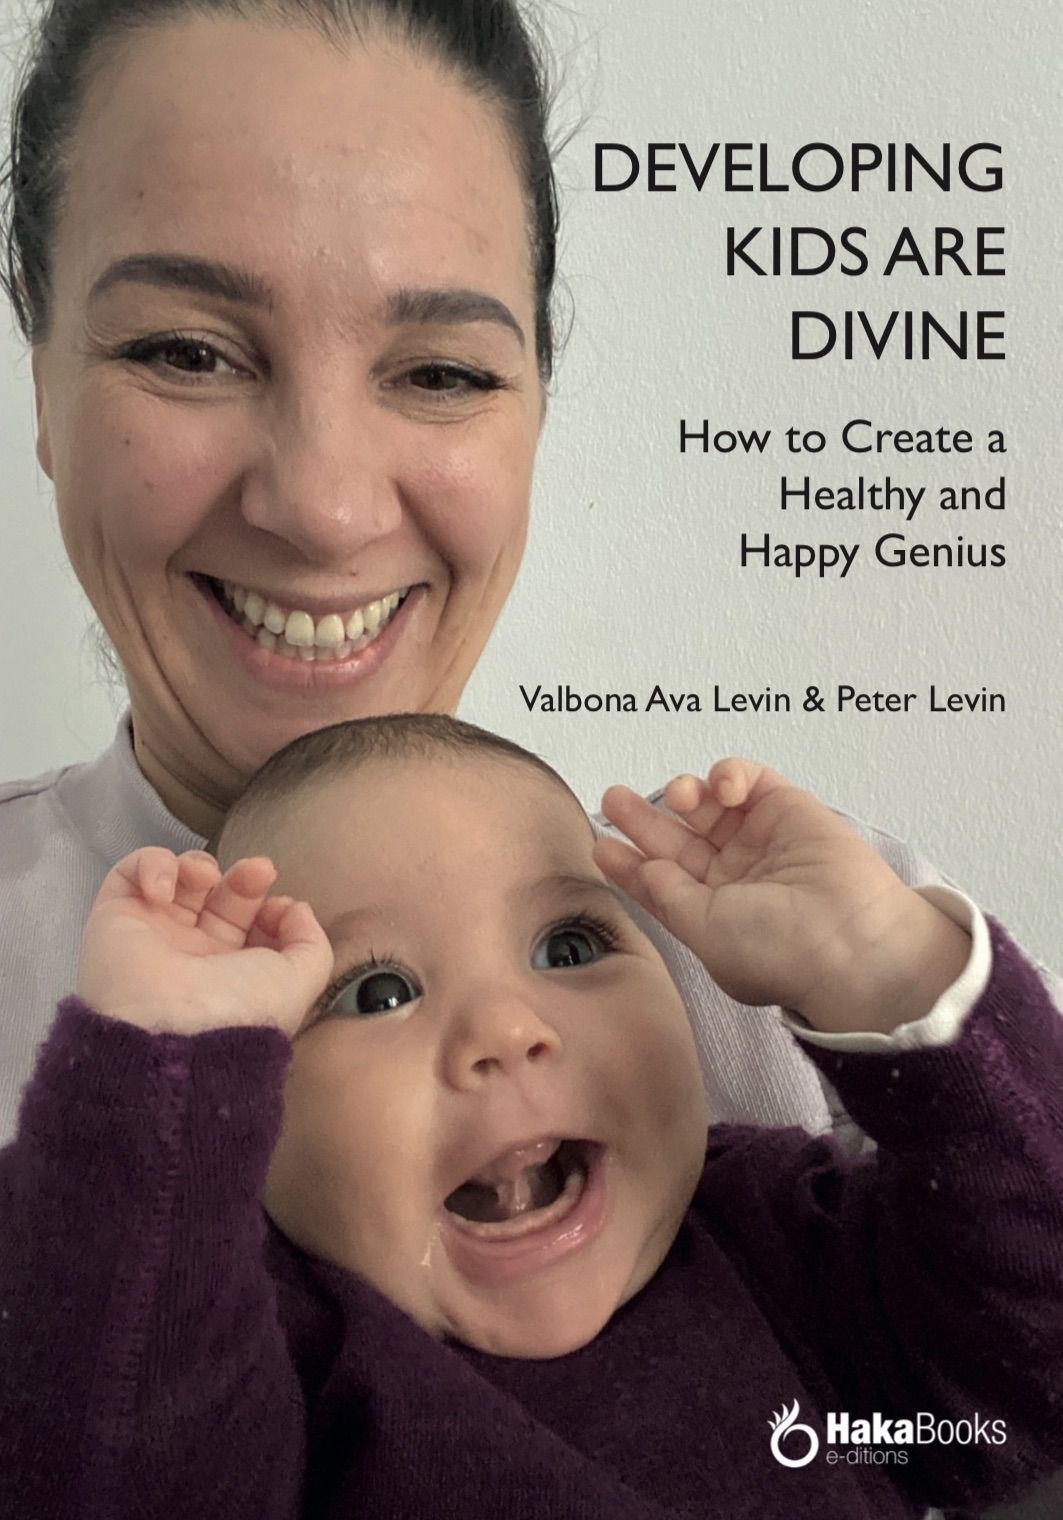 Developing Kids are divine